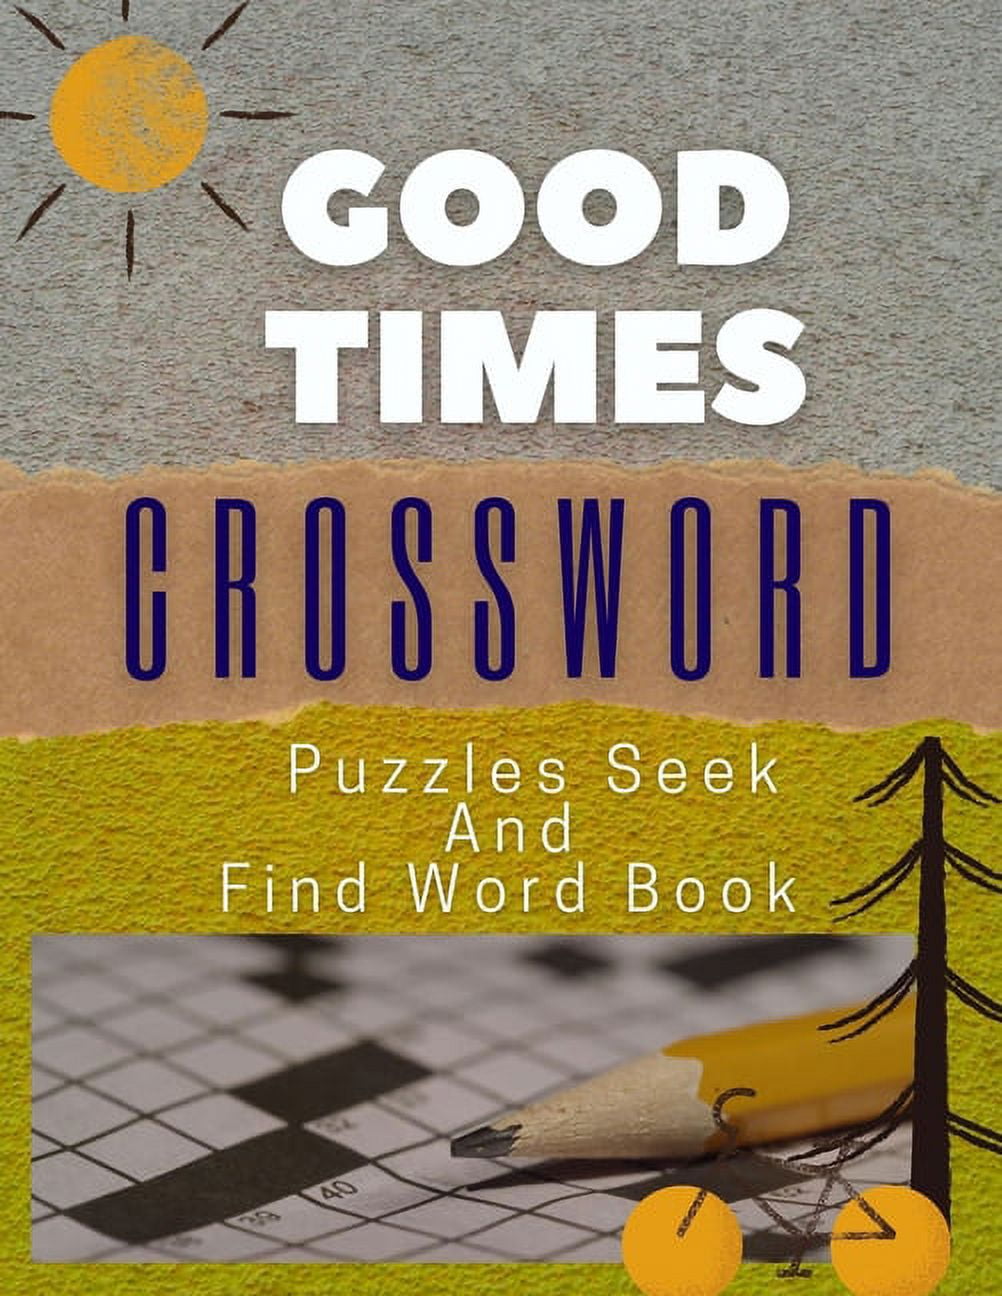 Good Times Crossword Puzzles Seek And Find Word Book : The Great Book